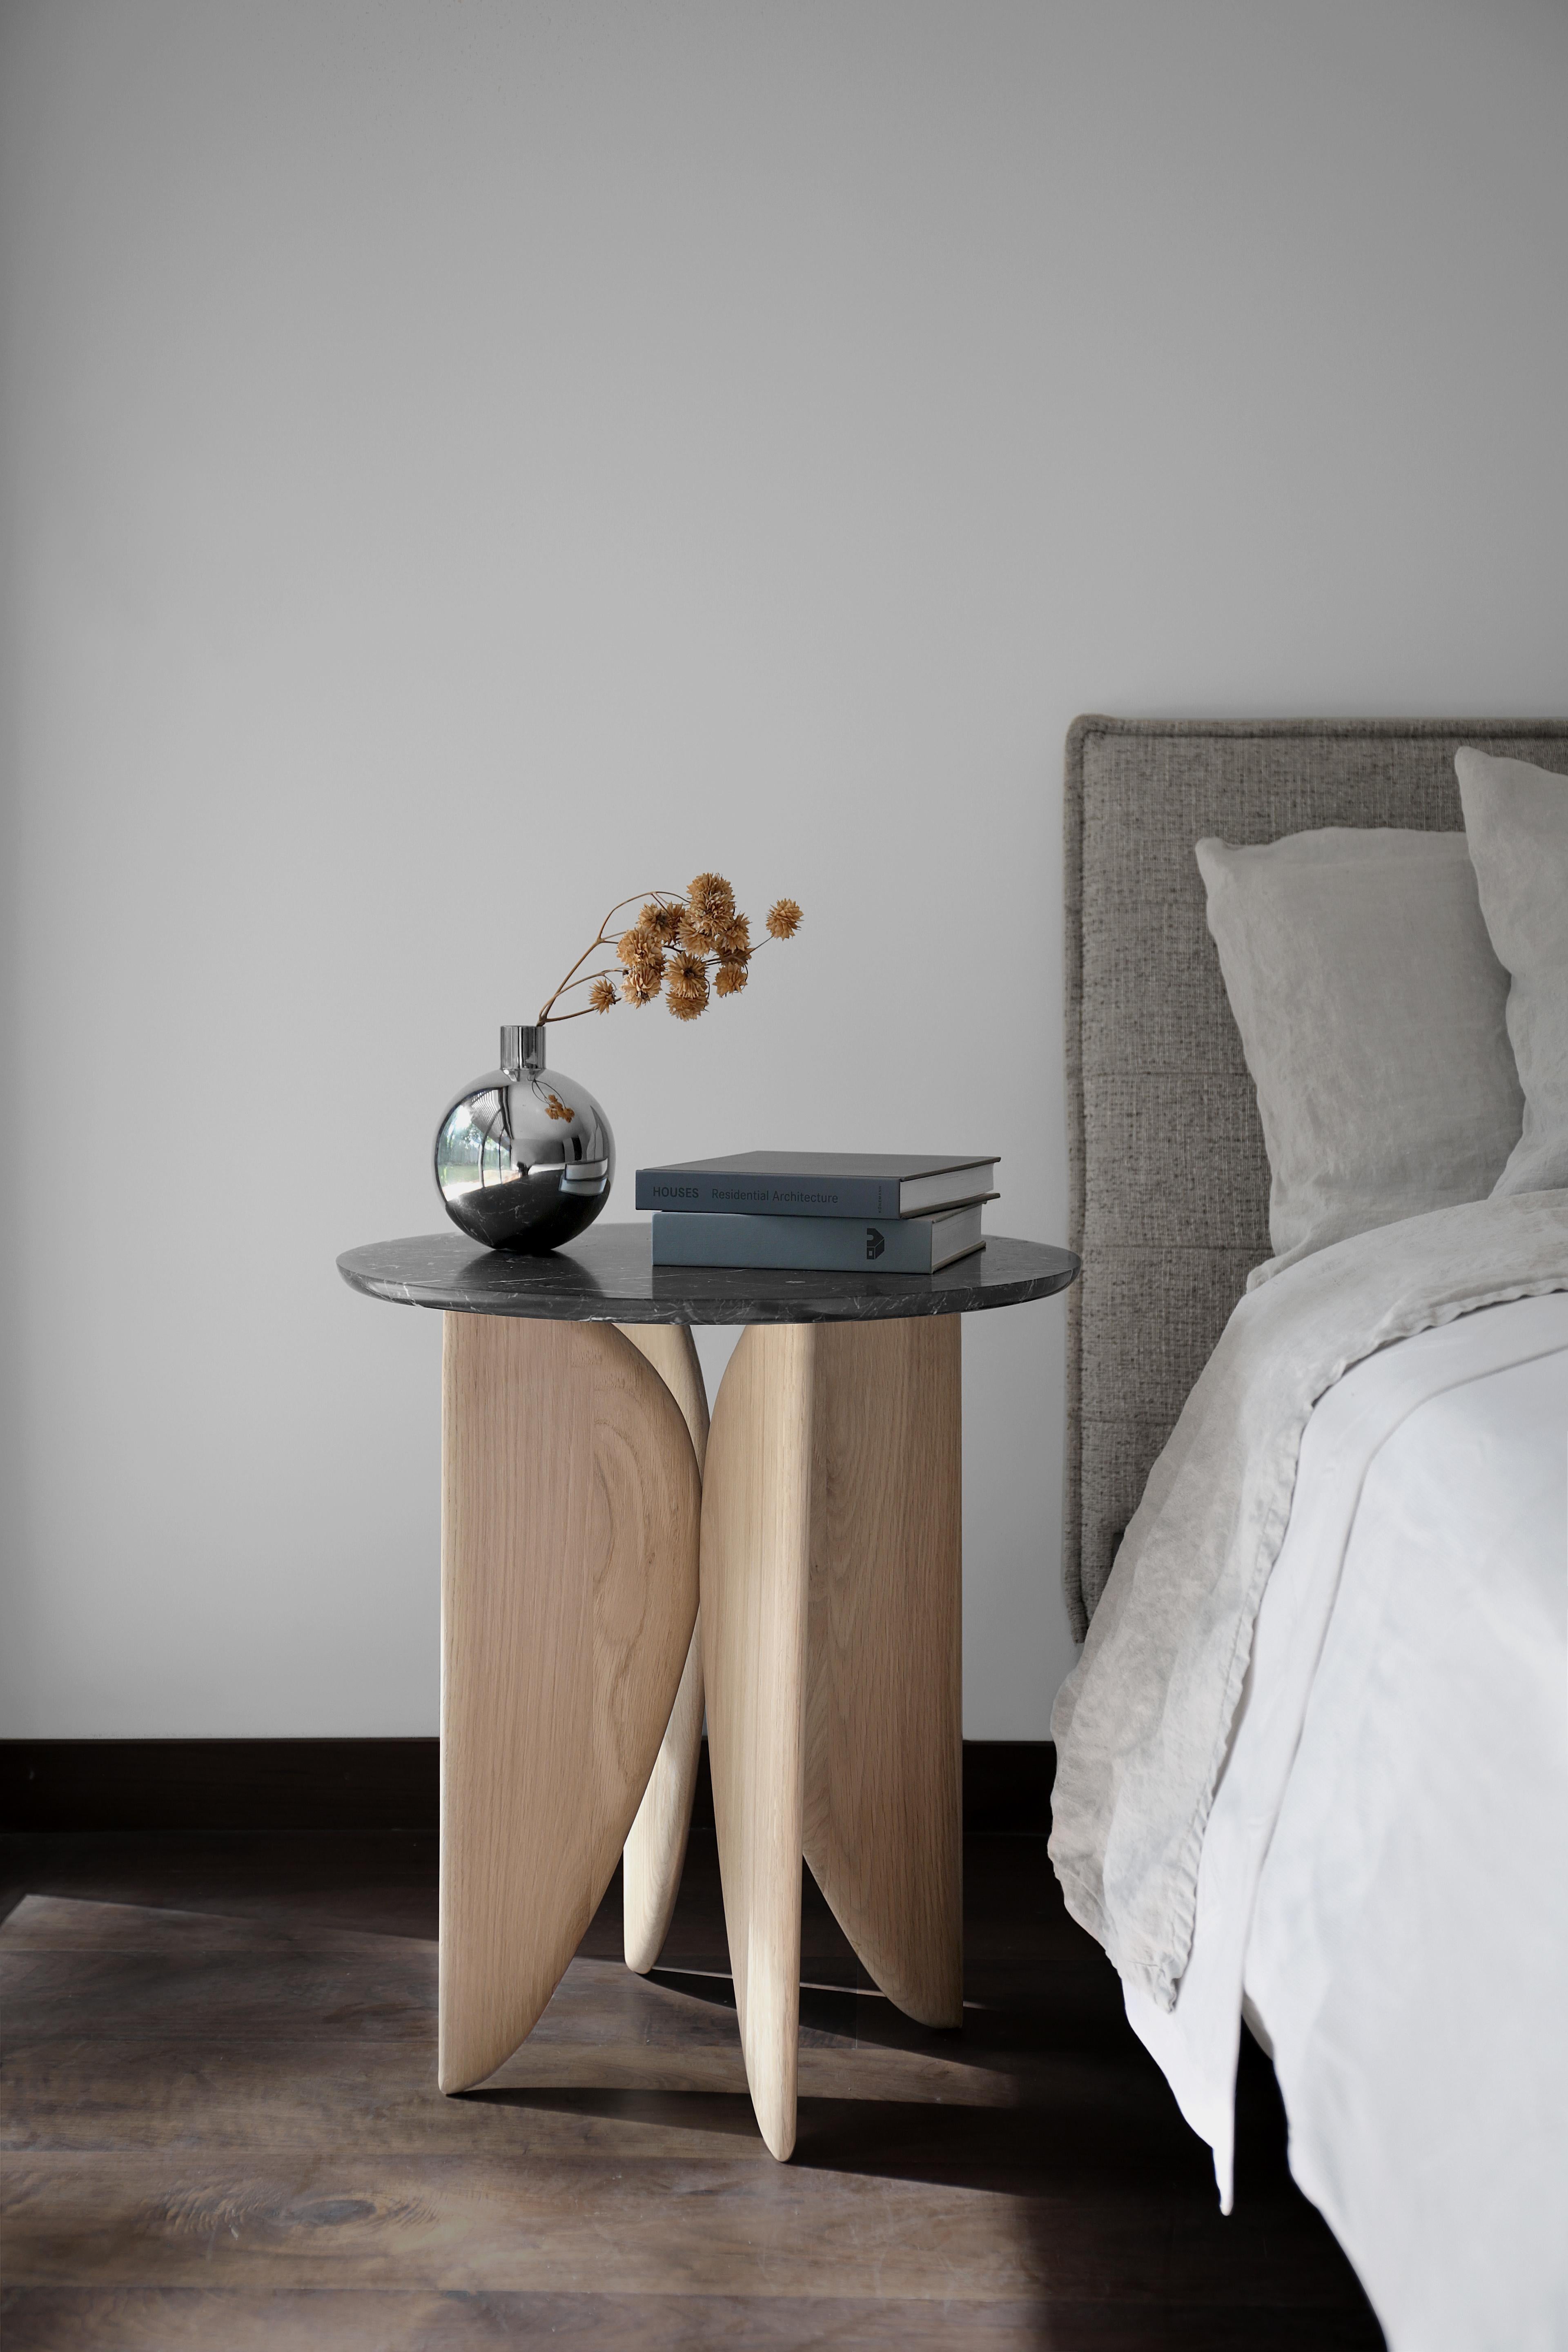 Noviembre VI Side Table, Night Stand in Oak Wood and Marble Top by Joel Escalona

The Noviembre collection is inspired by the creative values of Constantin Brancusi, a Romanian sculptor considered one of the most influential artists of the twentieth